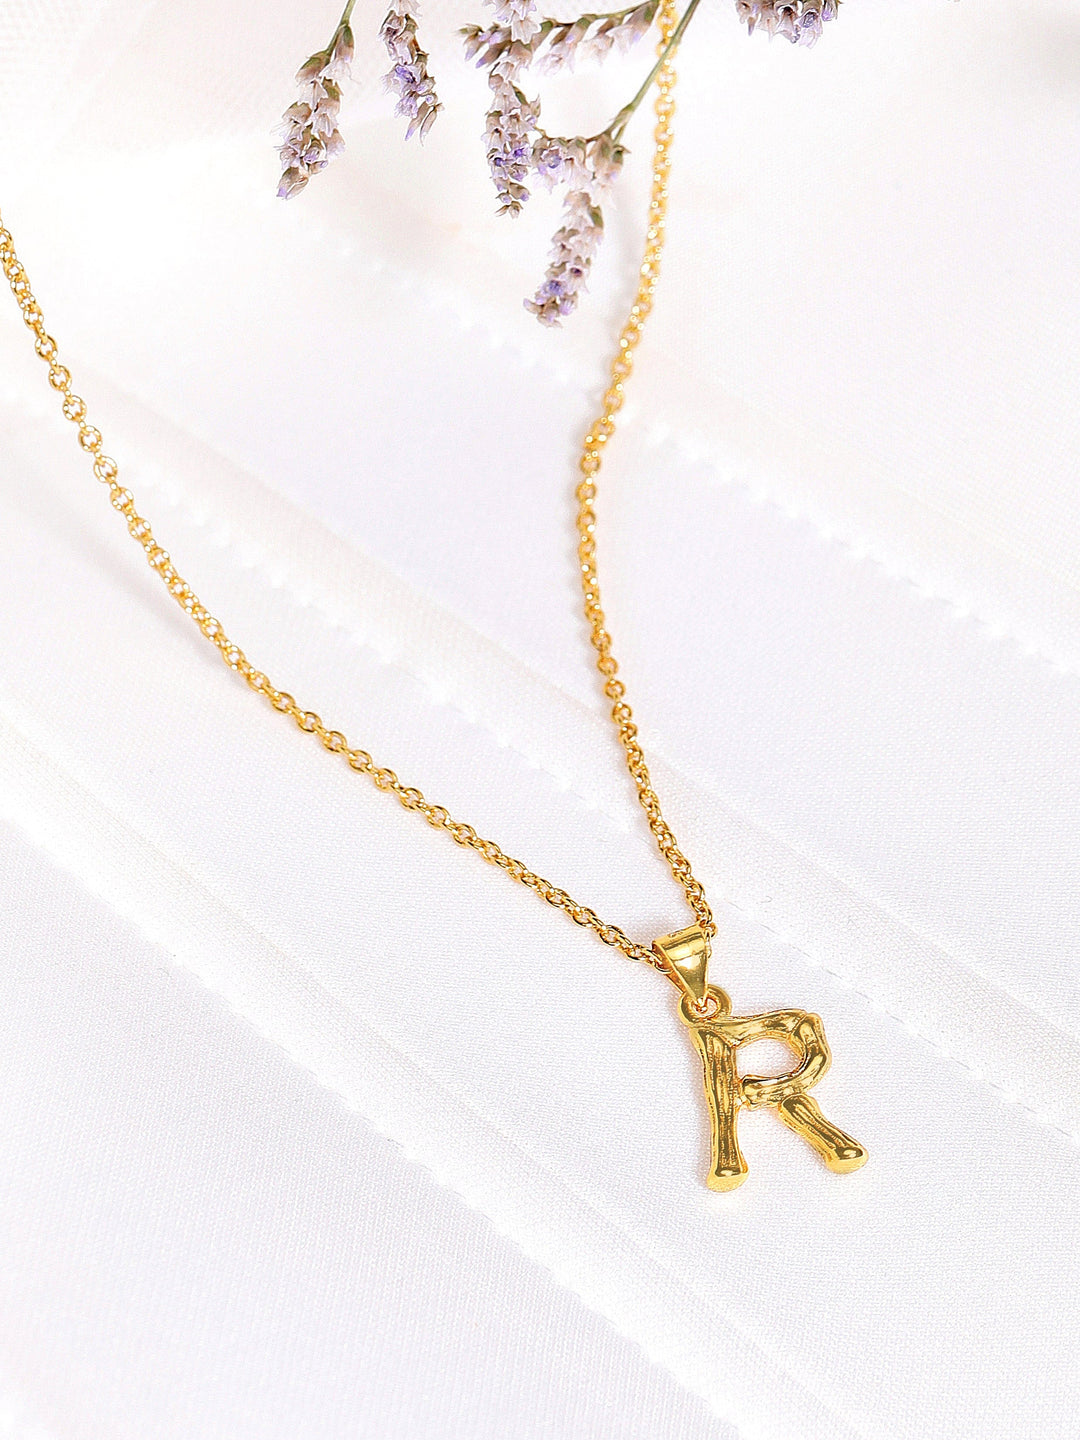 Tokyo Talkies x Rubans Fashion Accessories Gold Plated Alphabet "R" Necklace Necklaces, Necklace Sets, Chains & Mangalsutra